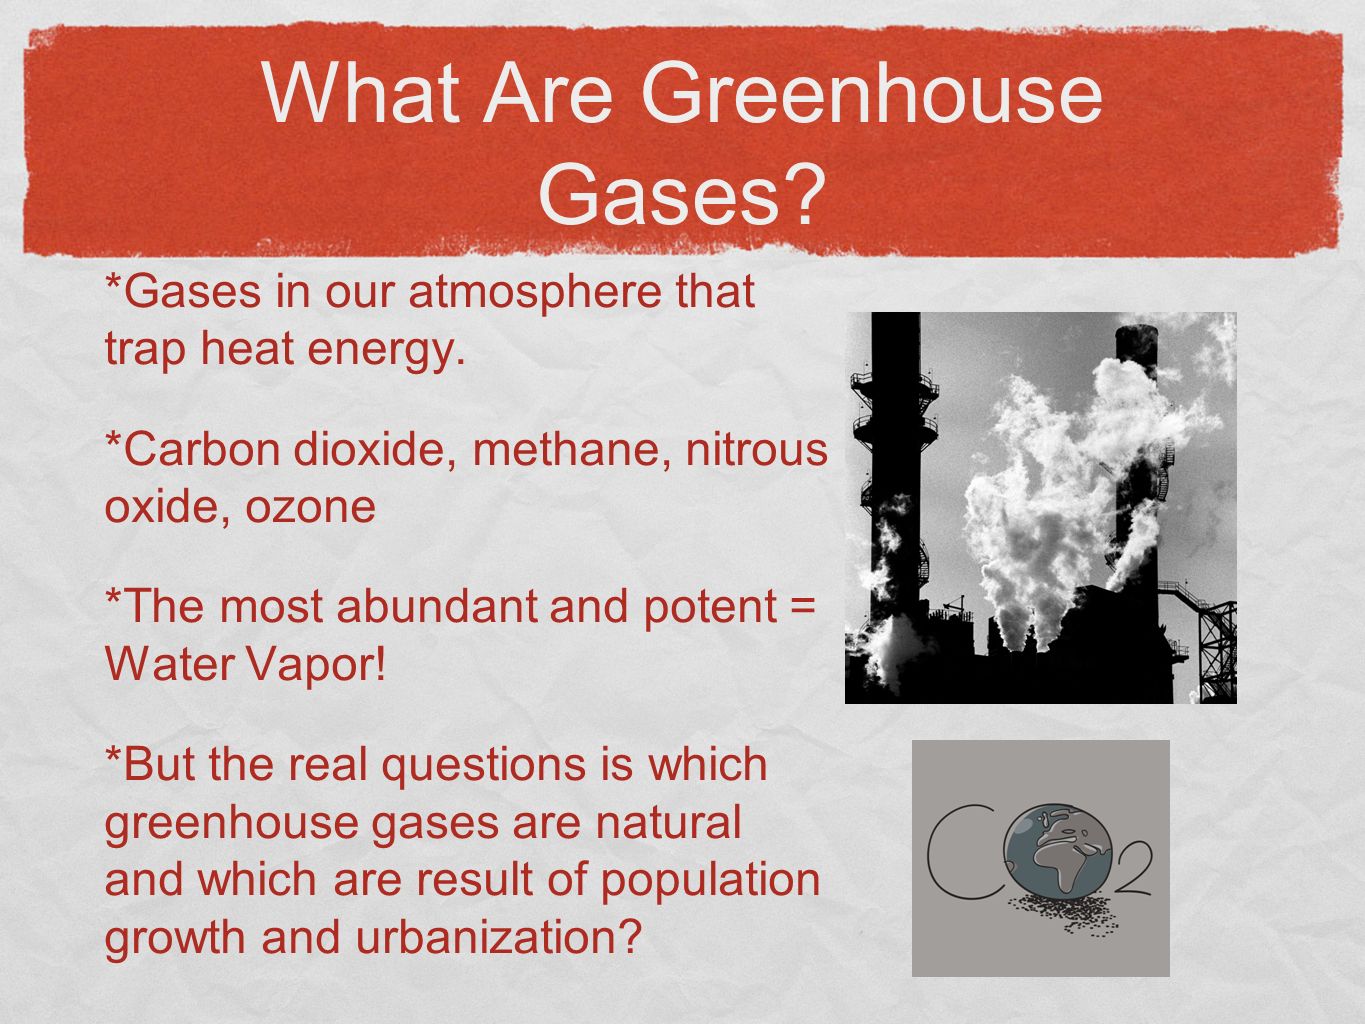 What Are Greenhouse Gases. *Gases in our atmosphere that trap heat energy.